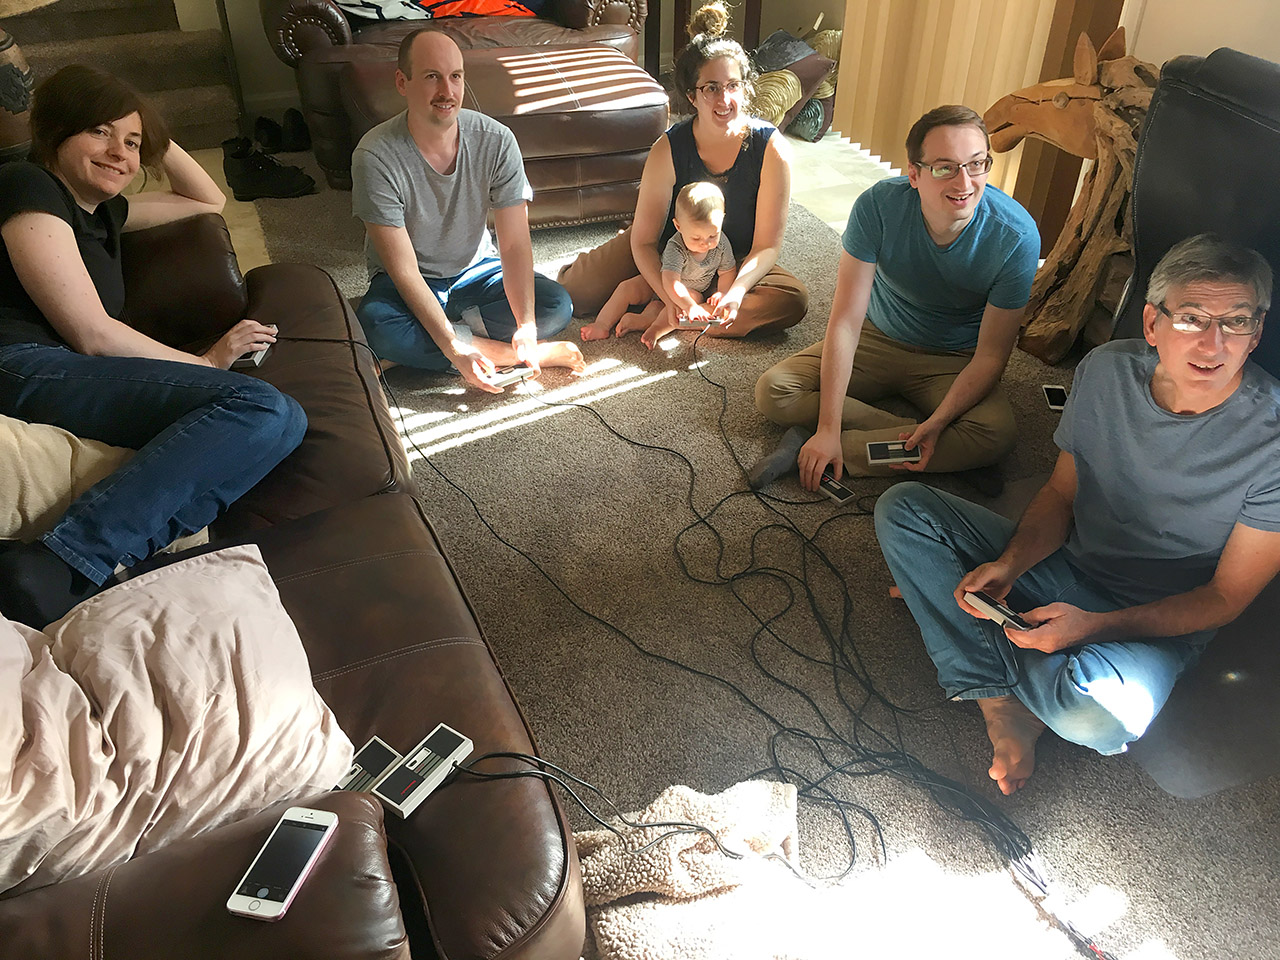 A family casually playing together in a livingroom in Denver.